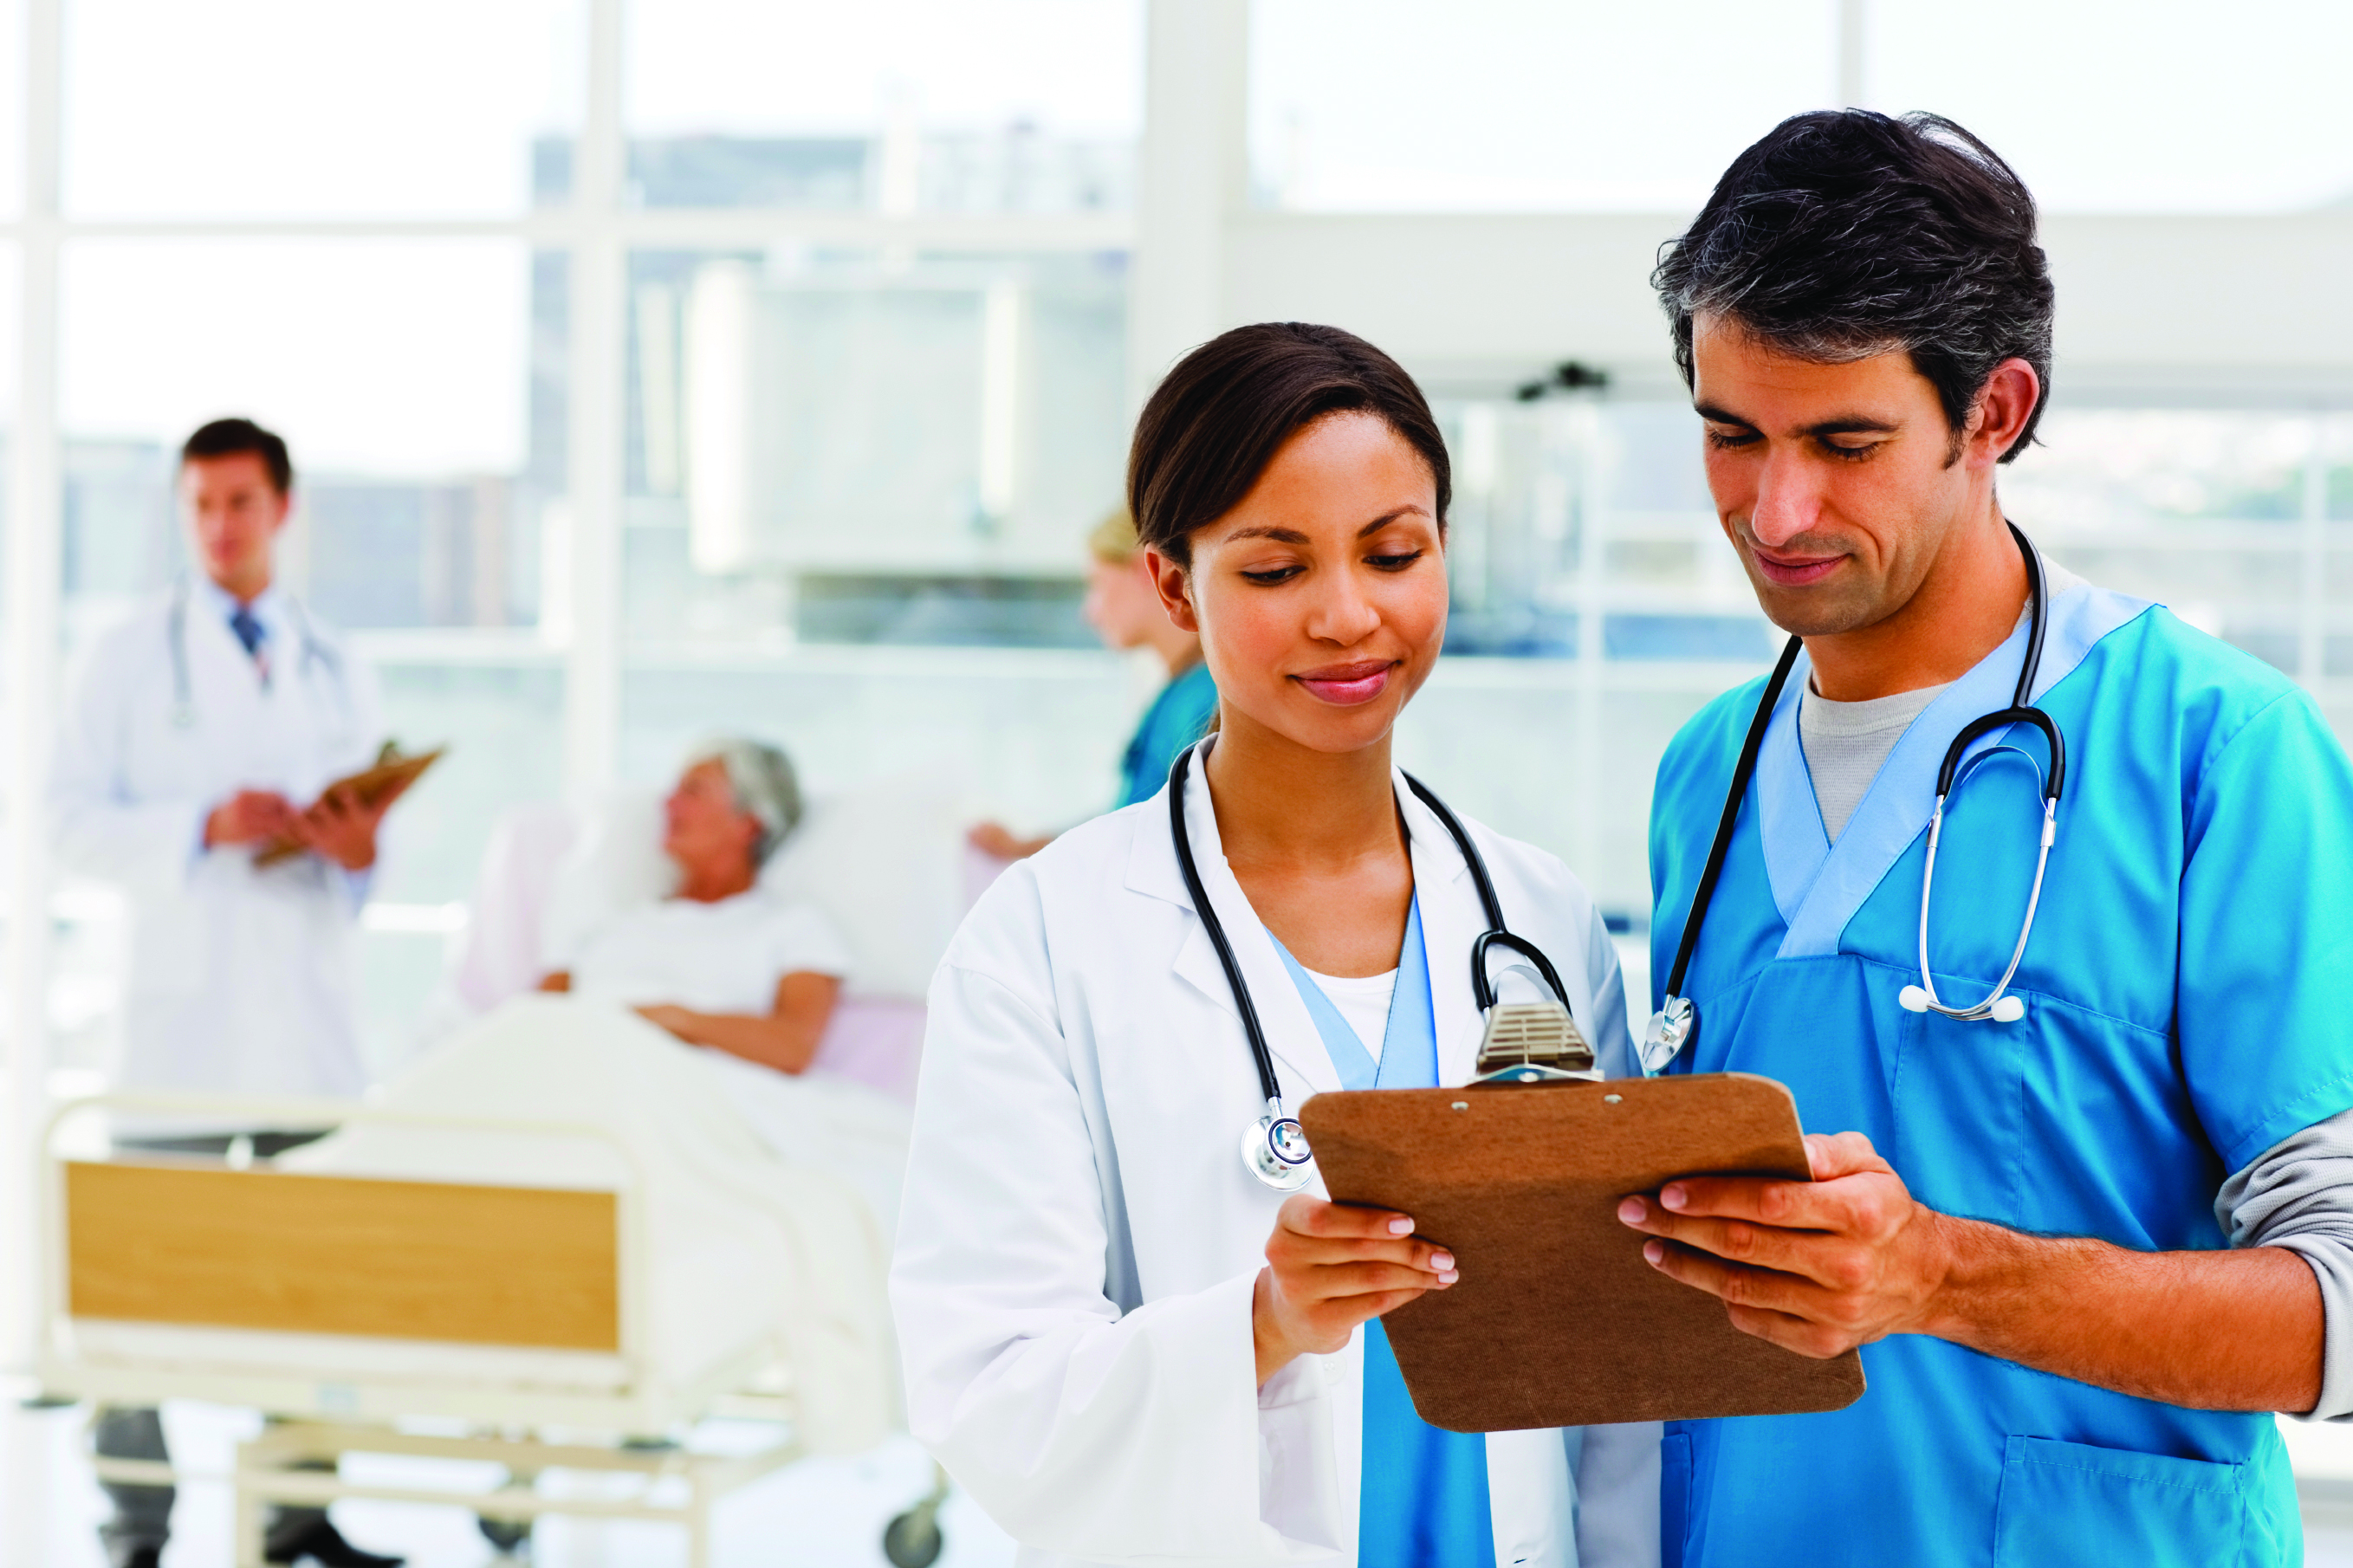 Two hospitalists look over a clipboard